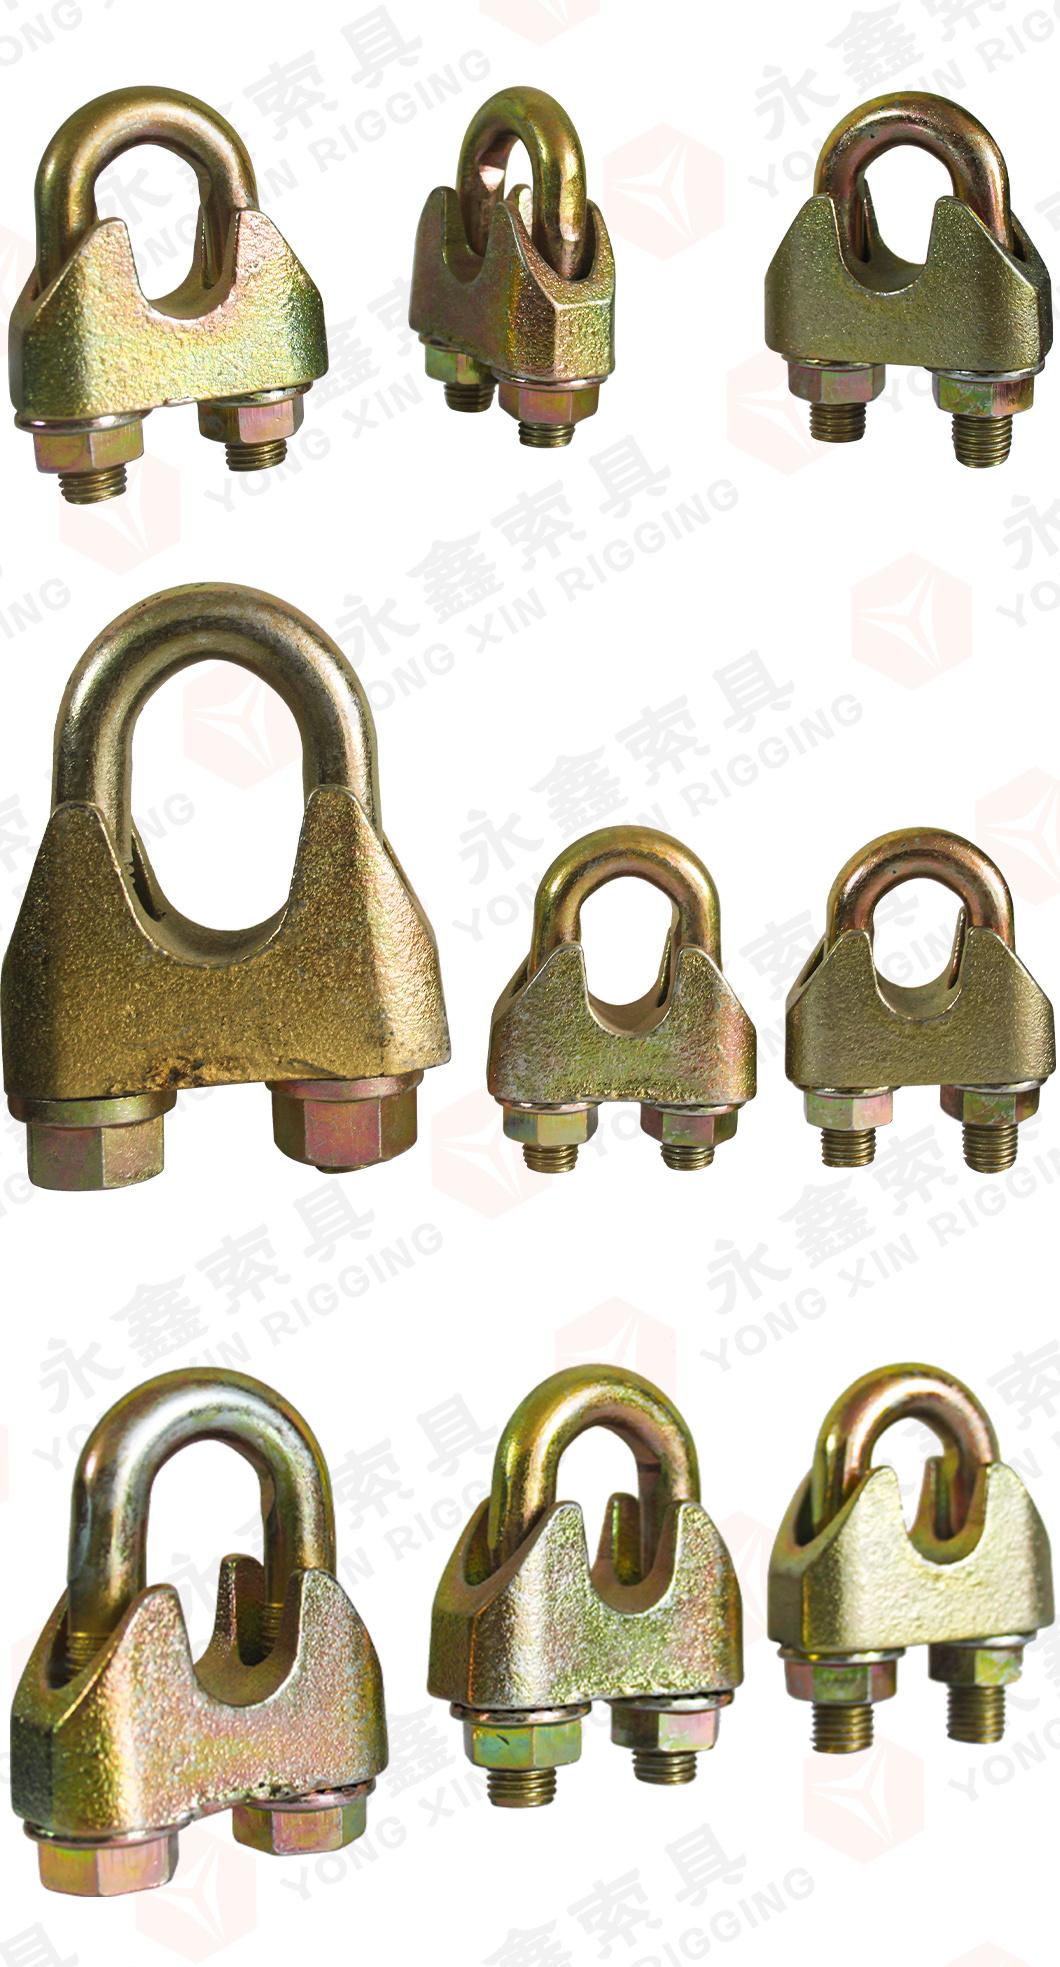 China Rigging Accessories Fasteners and Electrical Wire Rope Clips Australia Type DIN1142